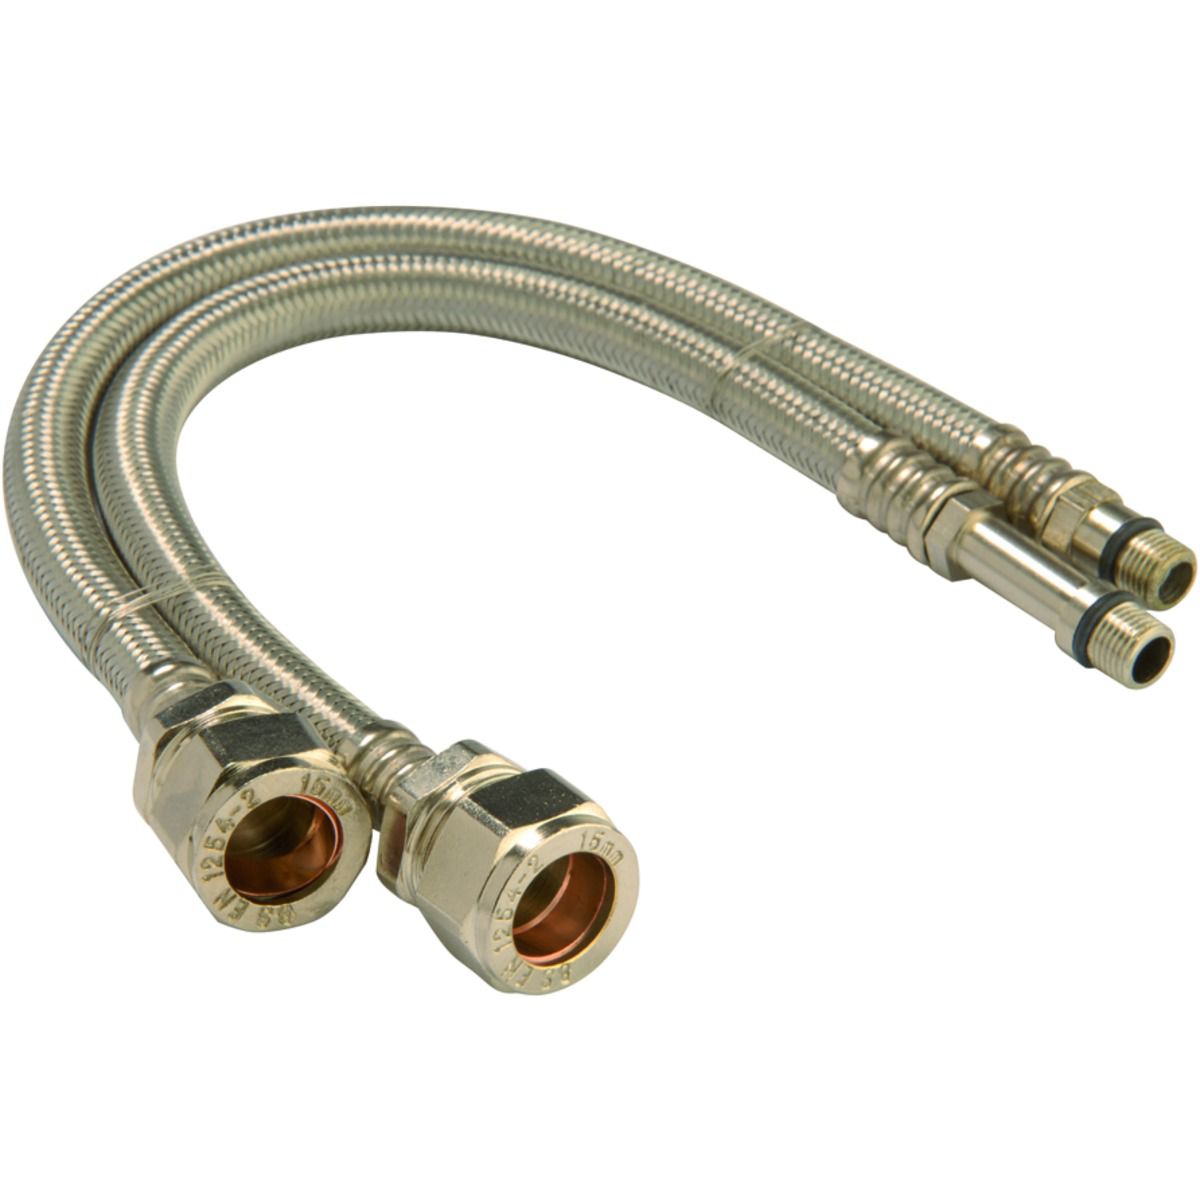 Image of Primaflow Flexible Monobloc Tap Connector - 15 X 12 X 300mm Pack Of 2